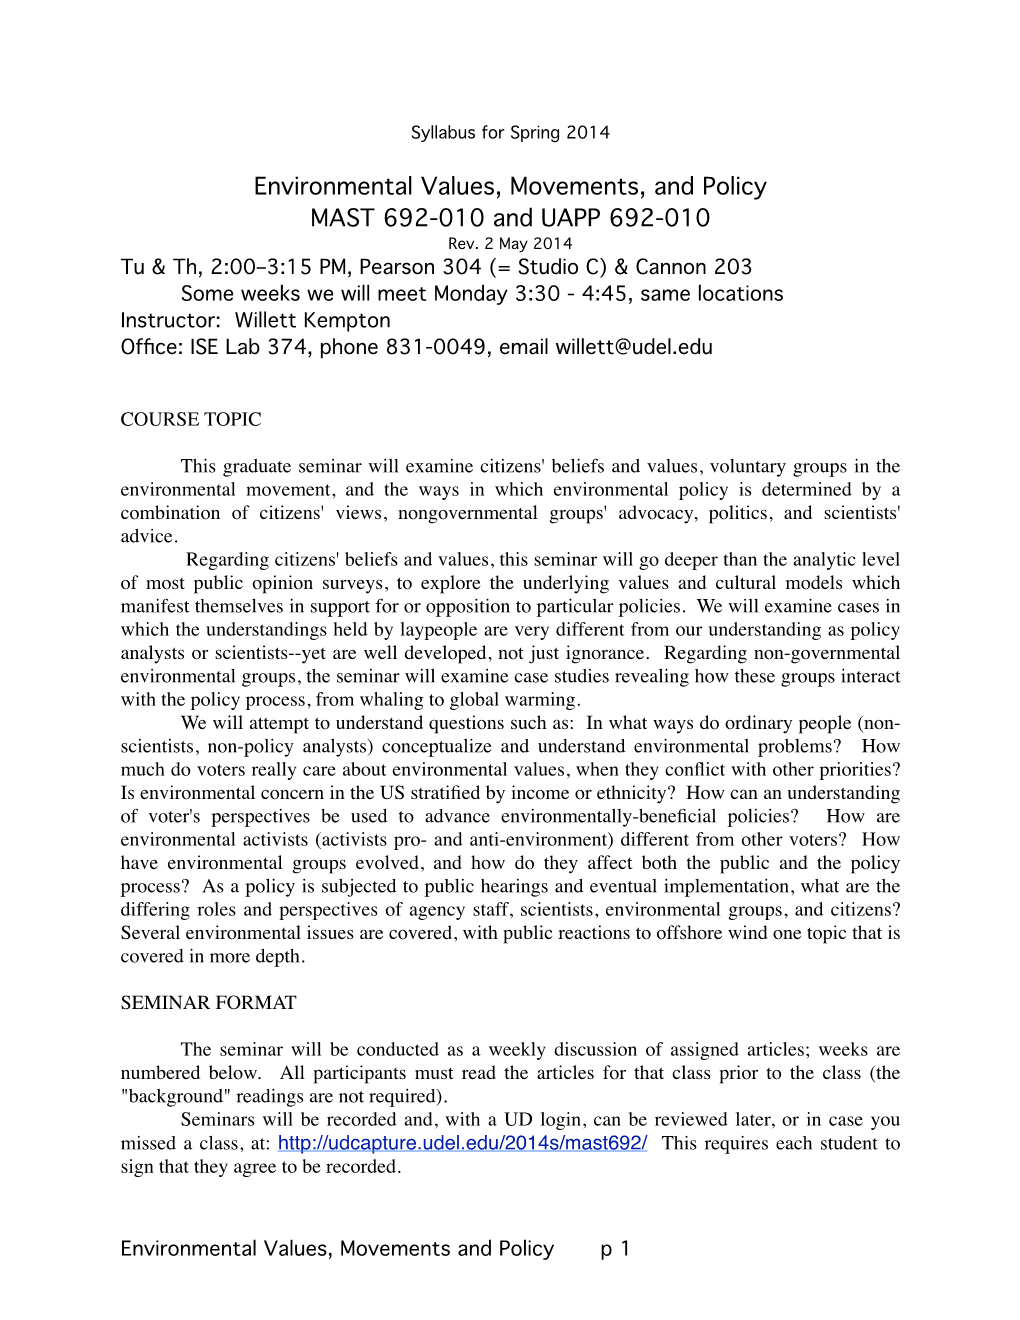 Environmental Values, Movements, and Policy MAST 692-010 And